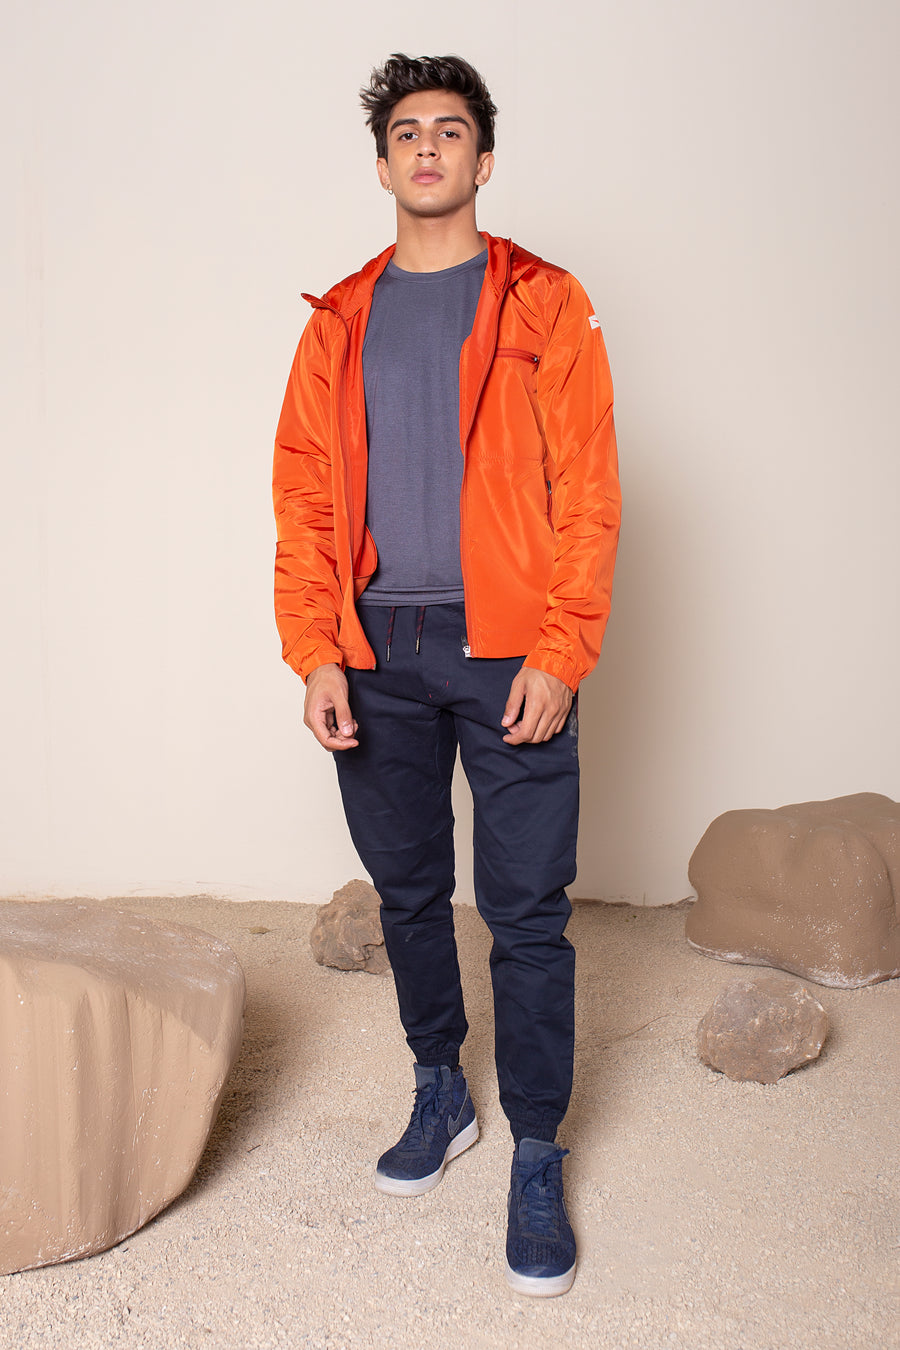 Men's Windansea Jacket in Orange | VOLO Apparel | The ultimate all year jacket, an ultralight hooded windbreaker, crafted with the revolutionary memory fabric and five pockets. This jacket is full of features, water repellant, three zipper pockets, UPF 50 protection from the sun and tailored fit to look super stylish while being ready for any adventure.